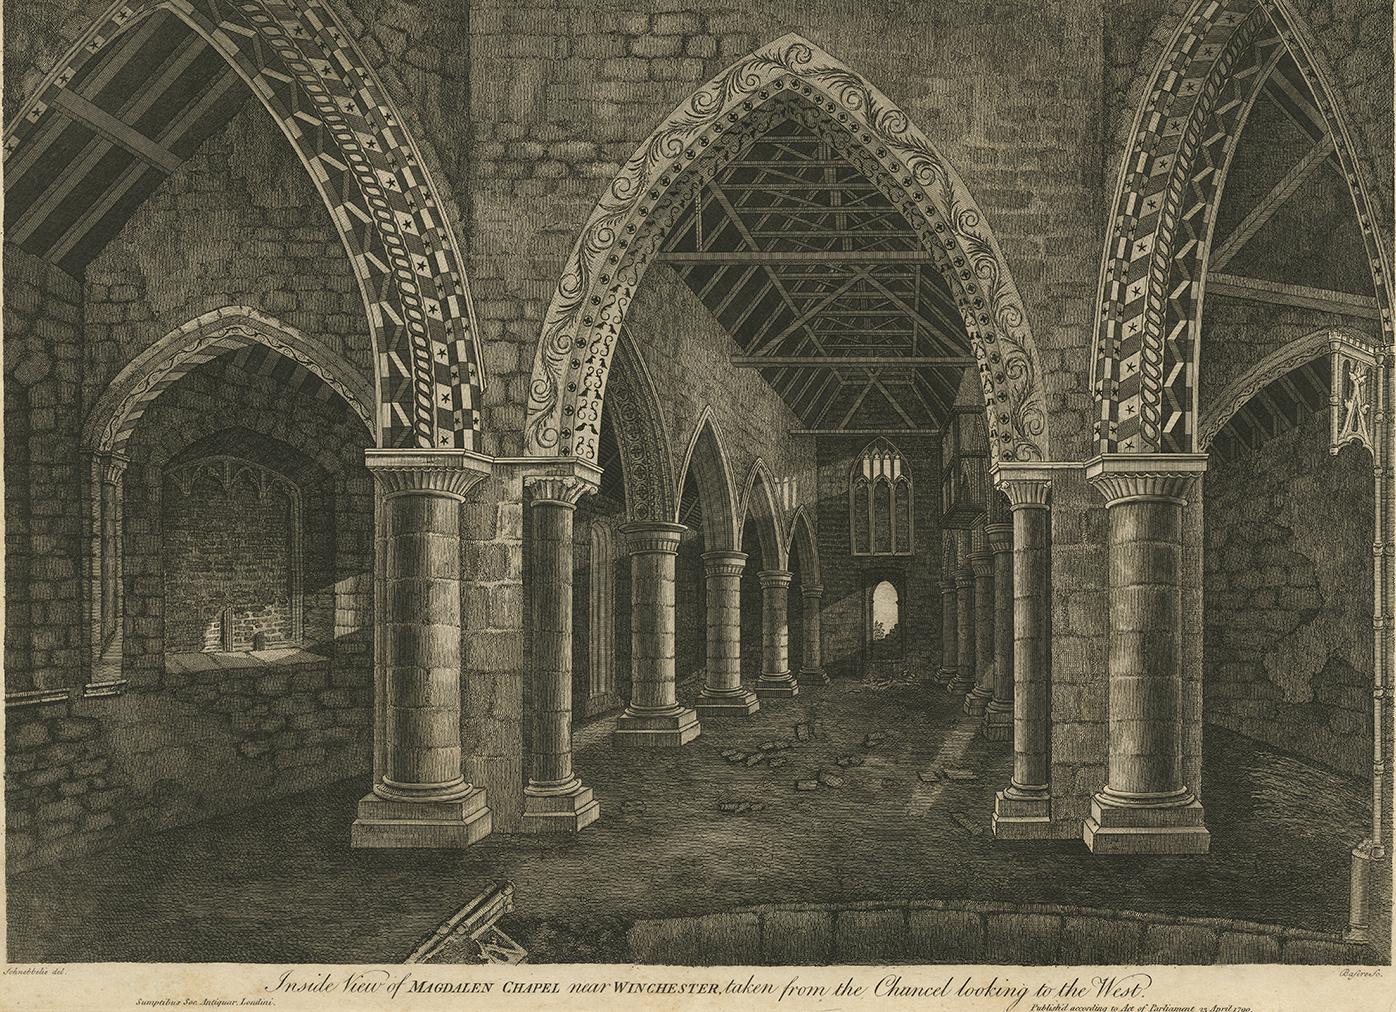 An antique line engraving by J. Basire after J. Schnebbelie, published in 1790. The Magdalen Chapel is located in the Cowgate in Edinburgh. The Chapel was built between 1541 and 1544 by Janet Rynd, widow of Michael MacQueen (died 1537), who had left